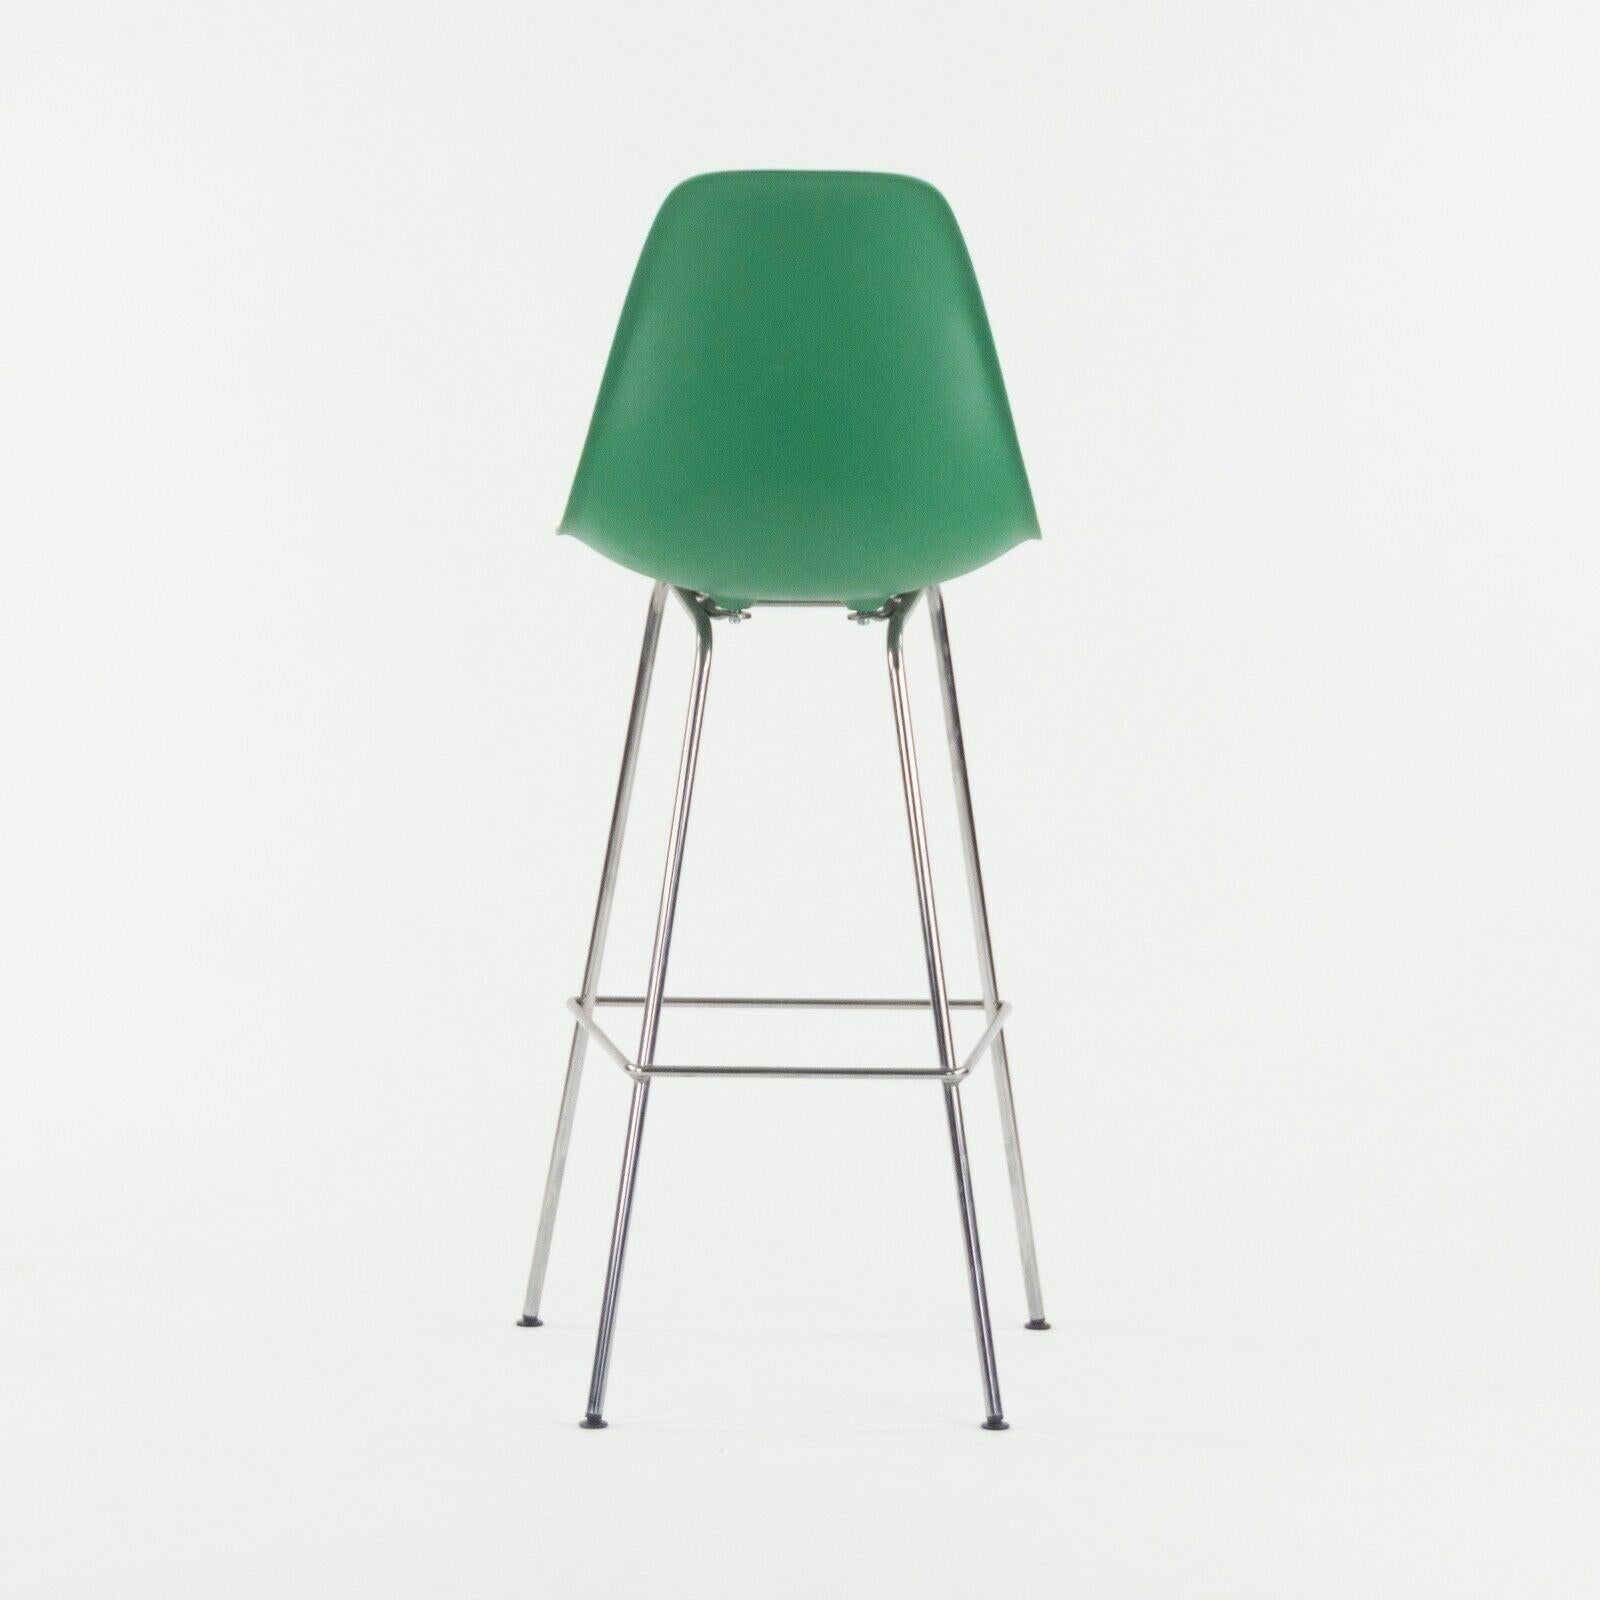 Ray and Charles Eames Herman Miller Molded Shell Bar Stool Chair Kelly Green In Good Condition For Sale In Philadelphia, PA